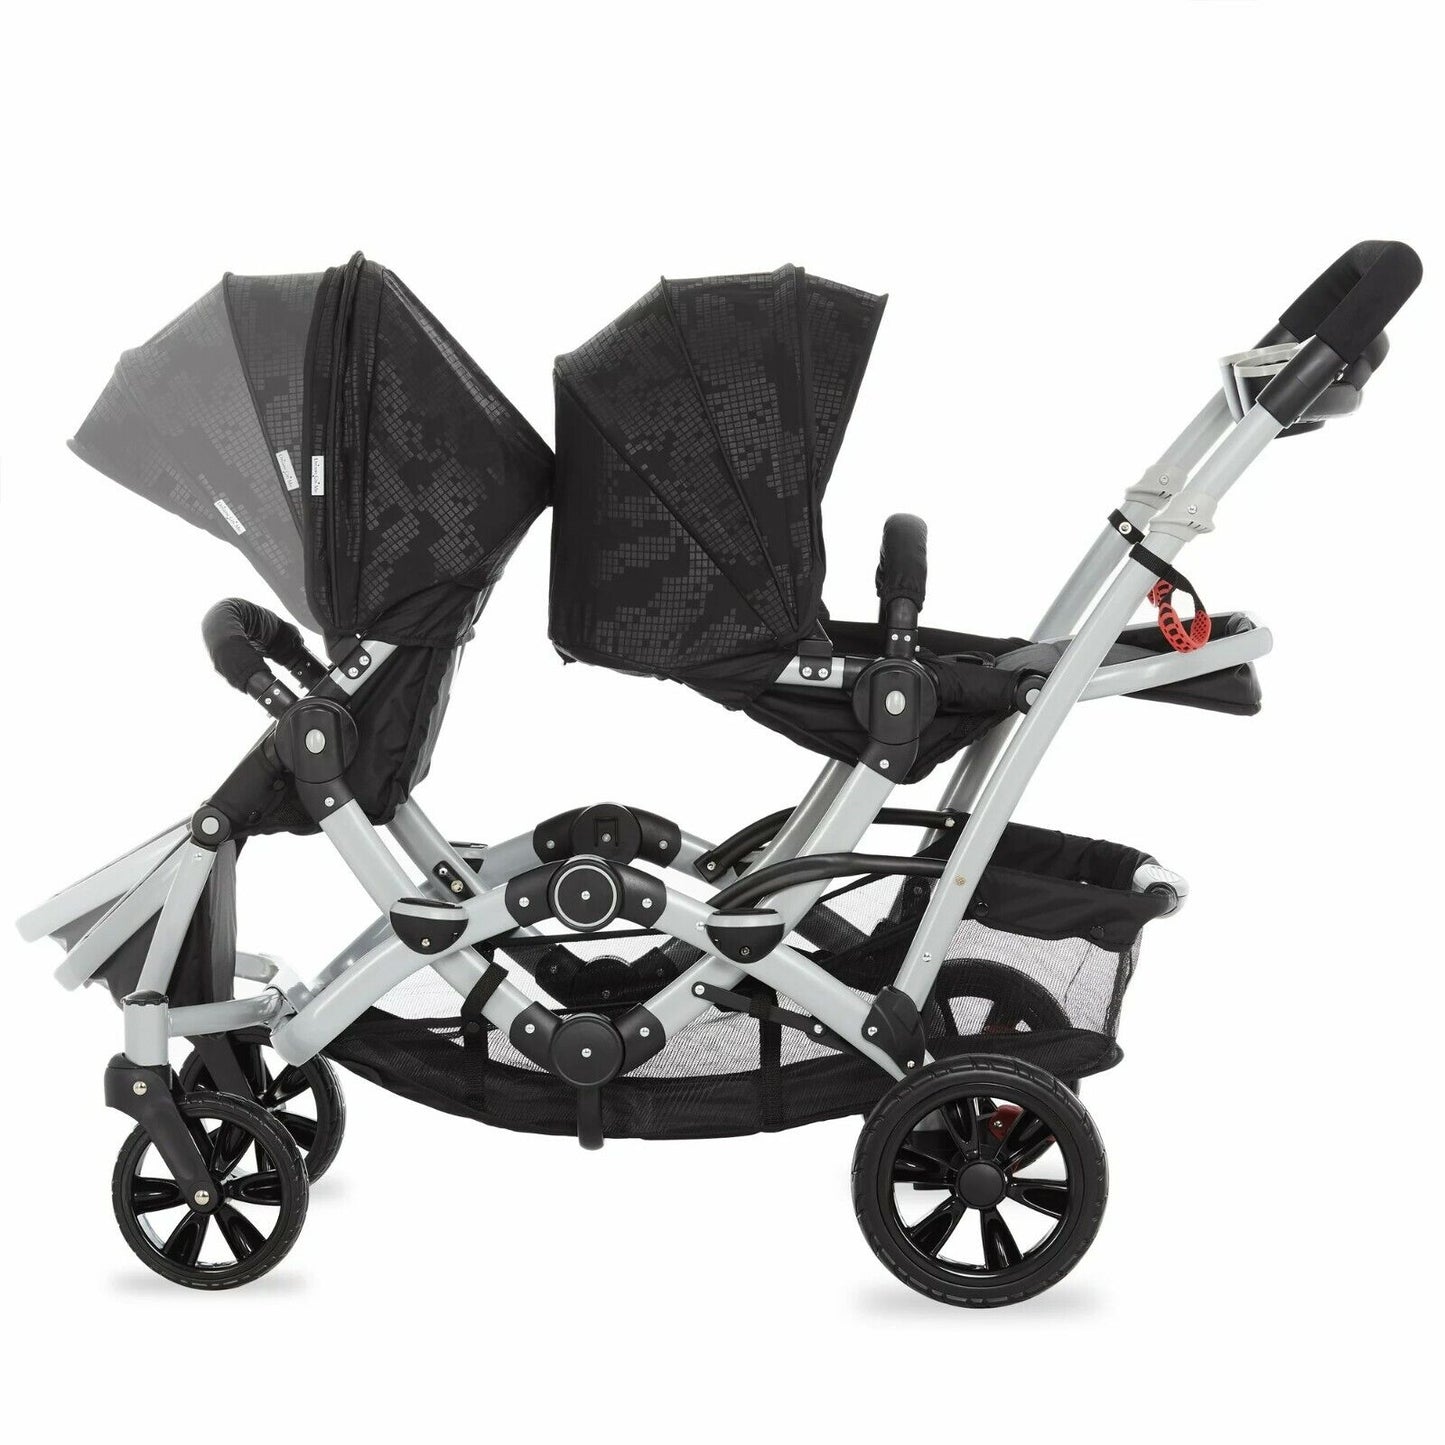 Double Baby Stroller Multi-position Lightweight Twin Toddler Foldable Travel Set